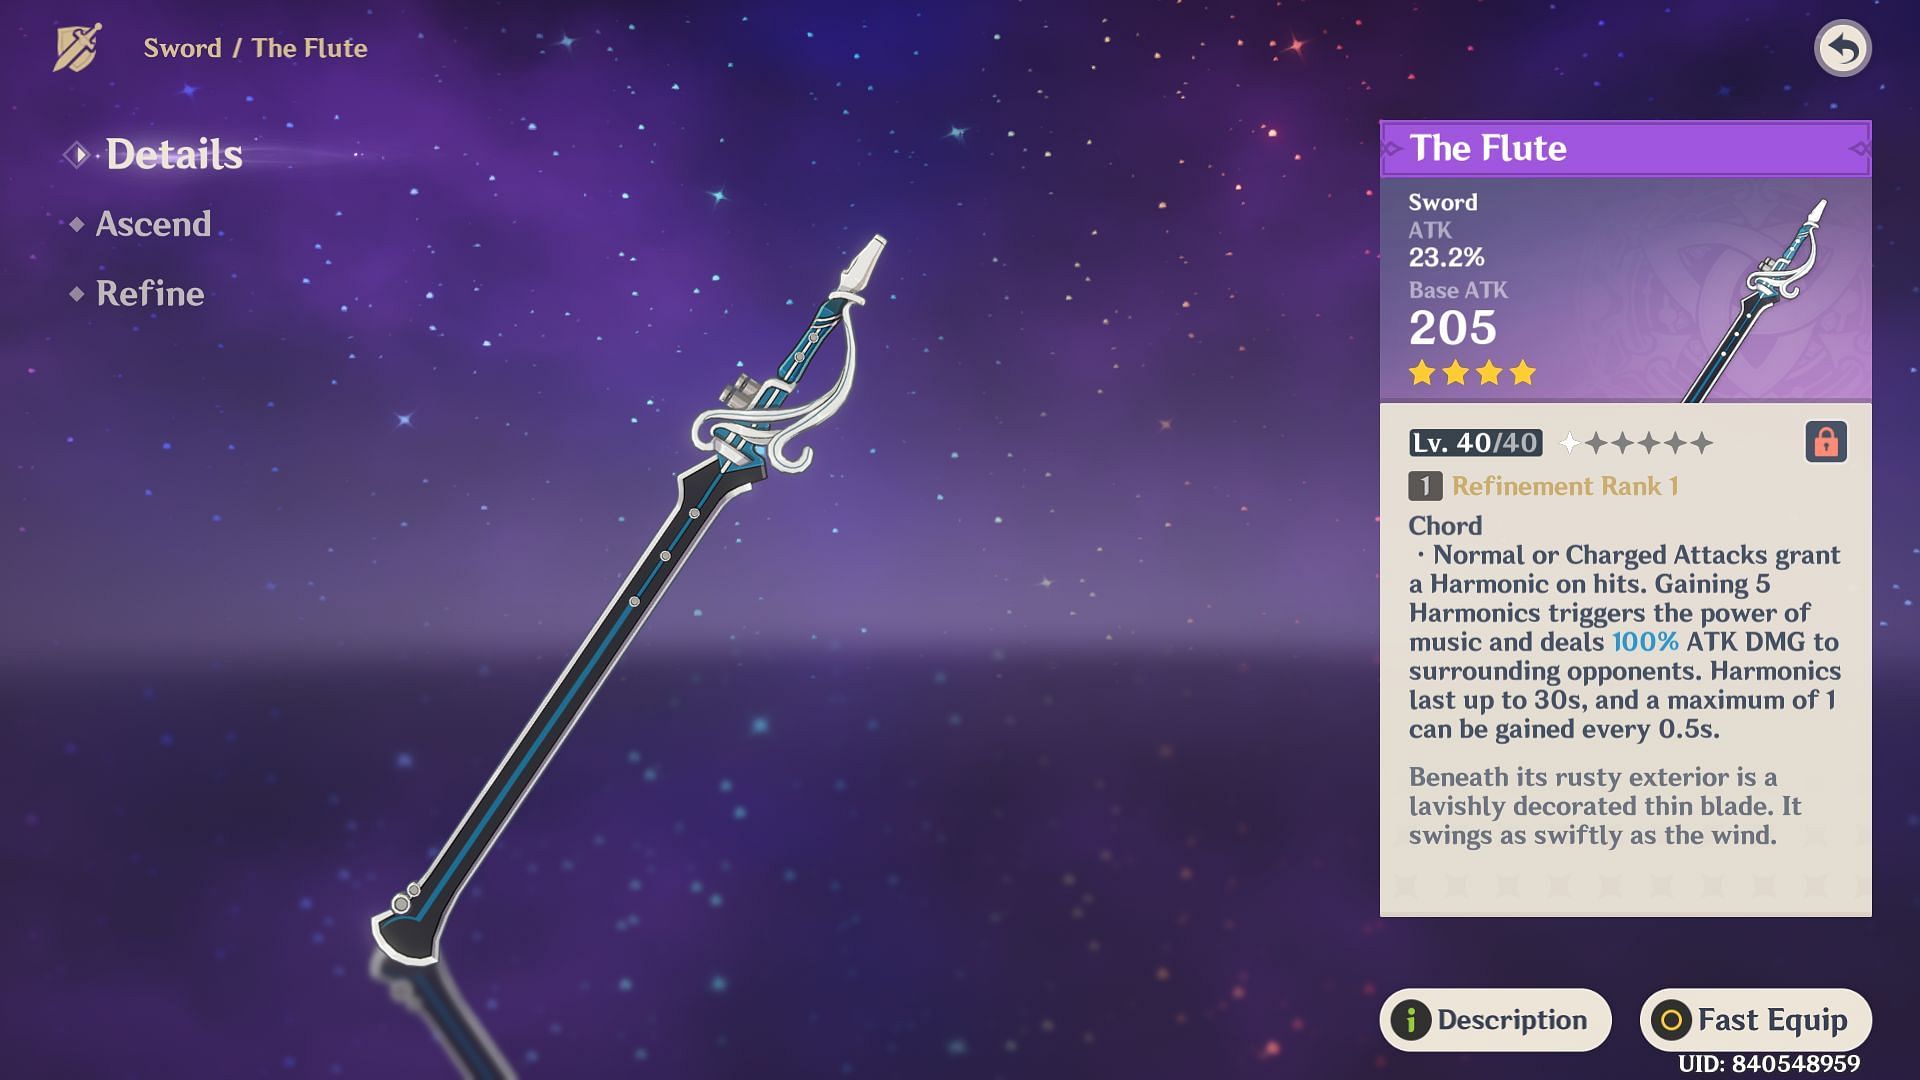 The Flute is a 4-star weapon (Image via HoYoverse)